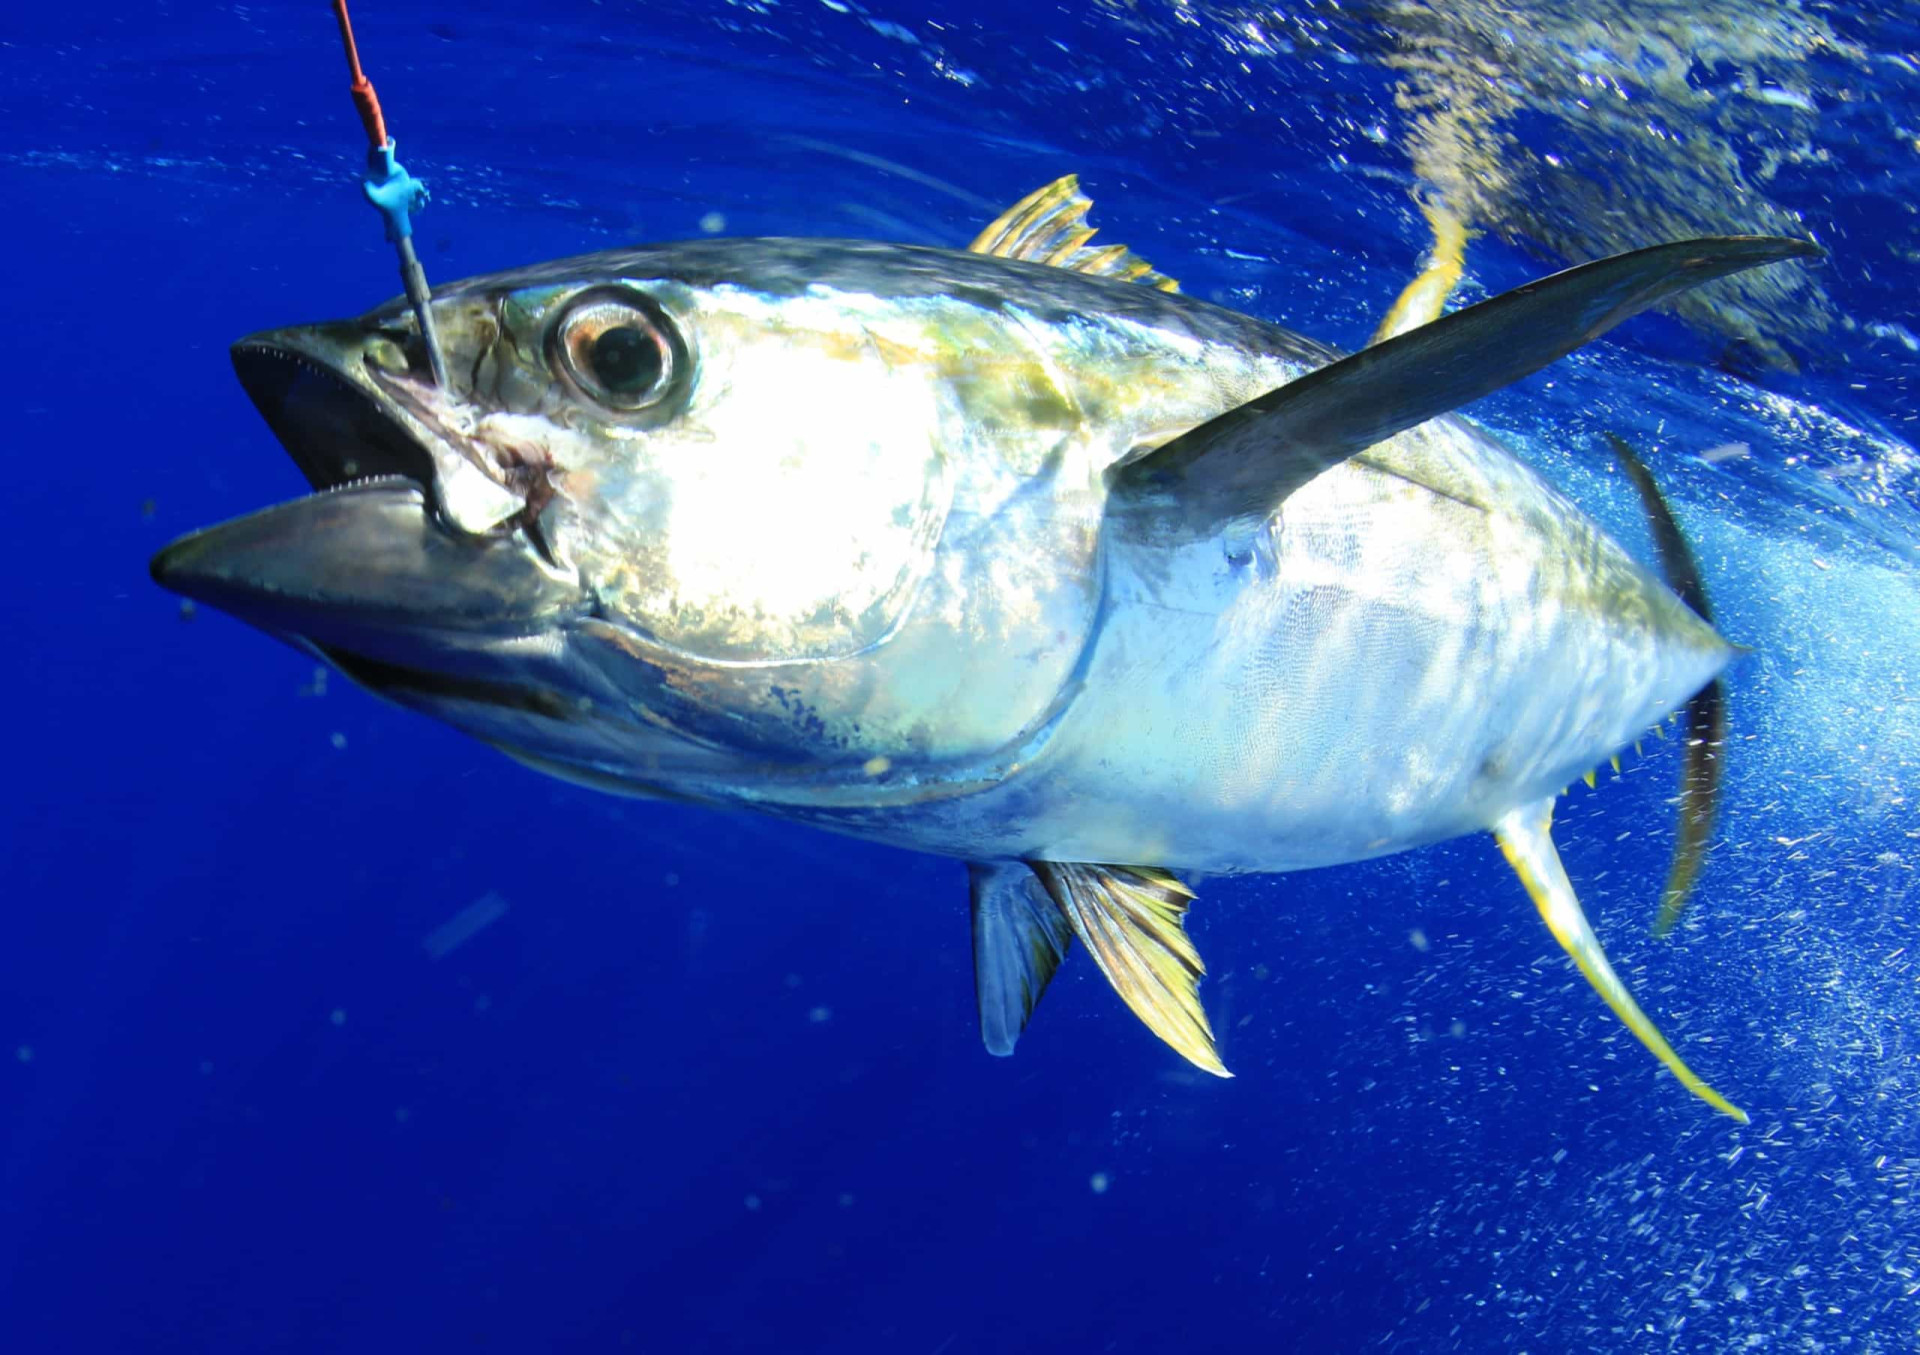 <p>Tuna is a highly sought-after fish, but unsustainable fishing practices have put certain species at risk. The World Wildlife Fund (WWF) states that Pacific bluefin tuna are severely overfished, while the Atlantic bigeye and Indian Ocean yellowfin tuna are facing increased catch levels, signaling overfishing.</p><p>You may also like:<a href="https://www.starsinsider.com/n/415364?utm_source=msn.com&utm_medium=display&utm_campaign=referral_description&utm_content=578219en-en"> The controversial Sultan of Brunei, the current longest-ruling monarch in the world</a></p>